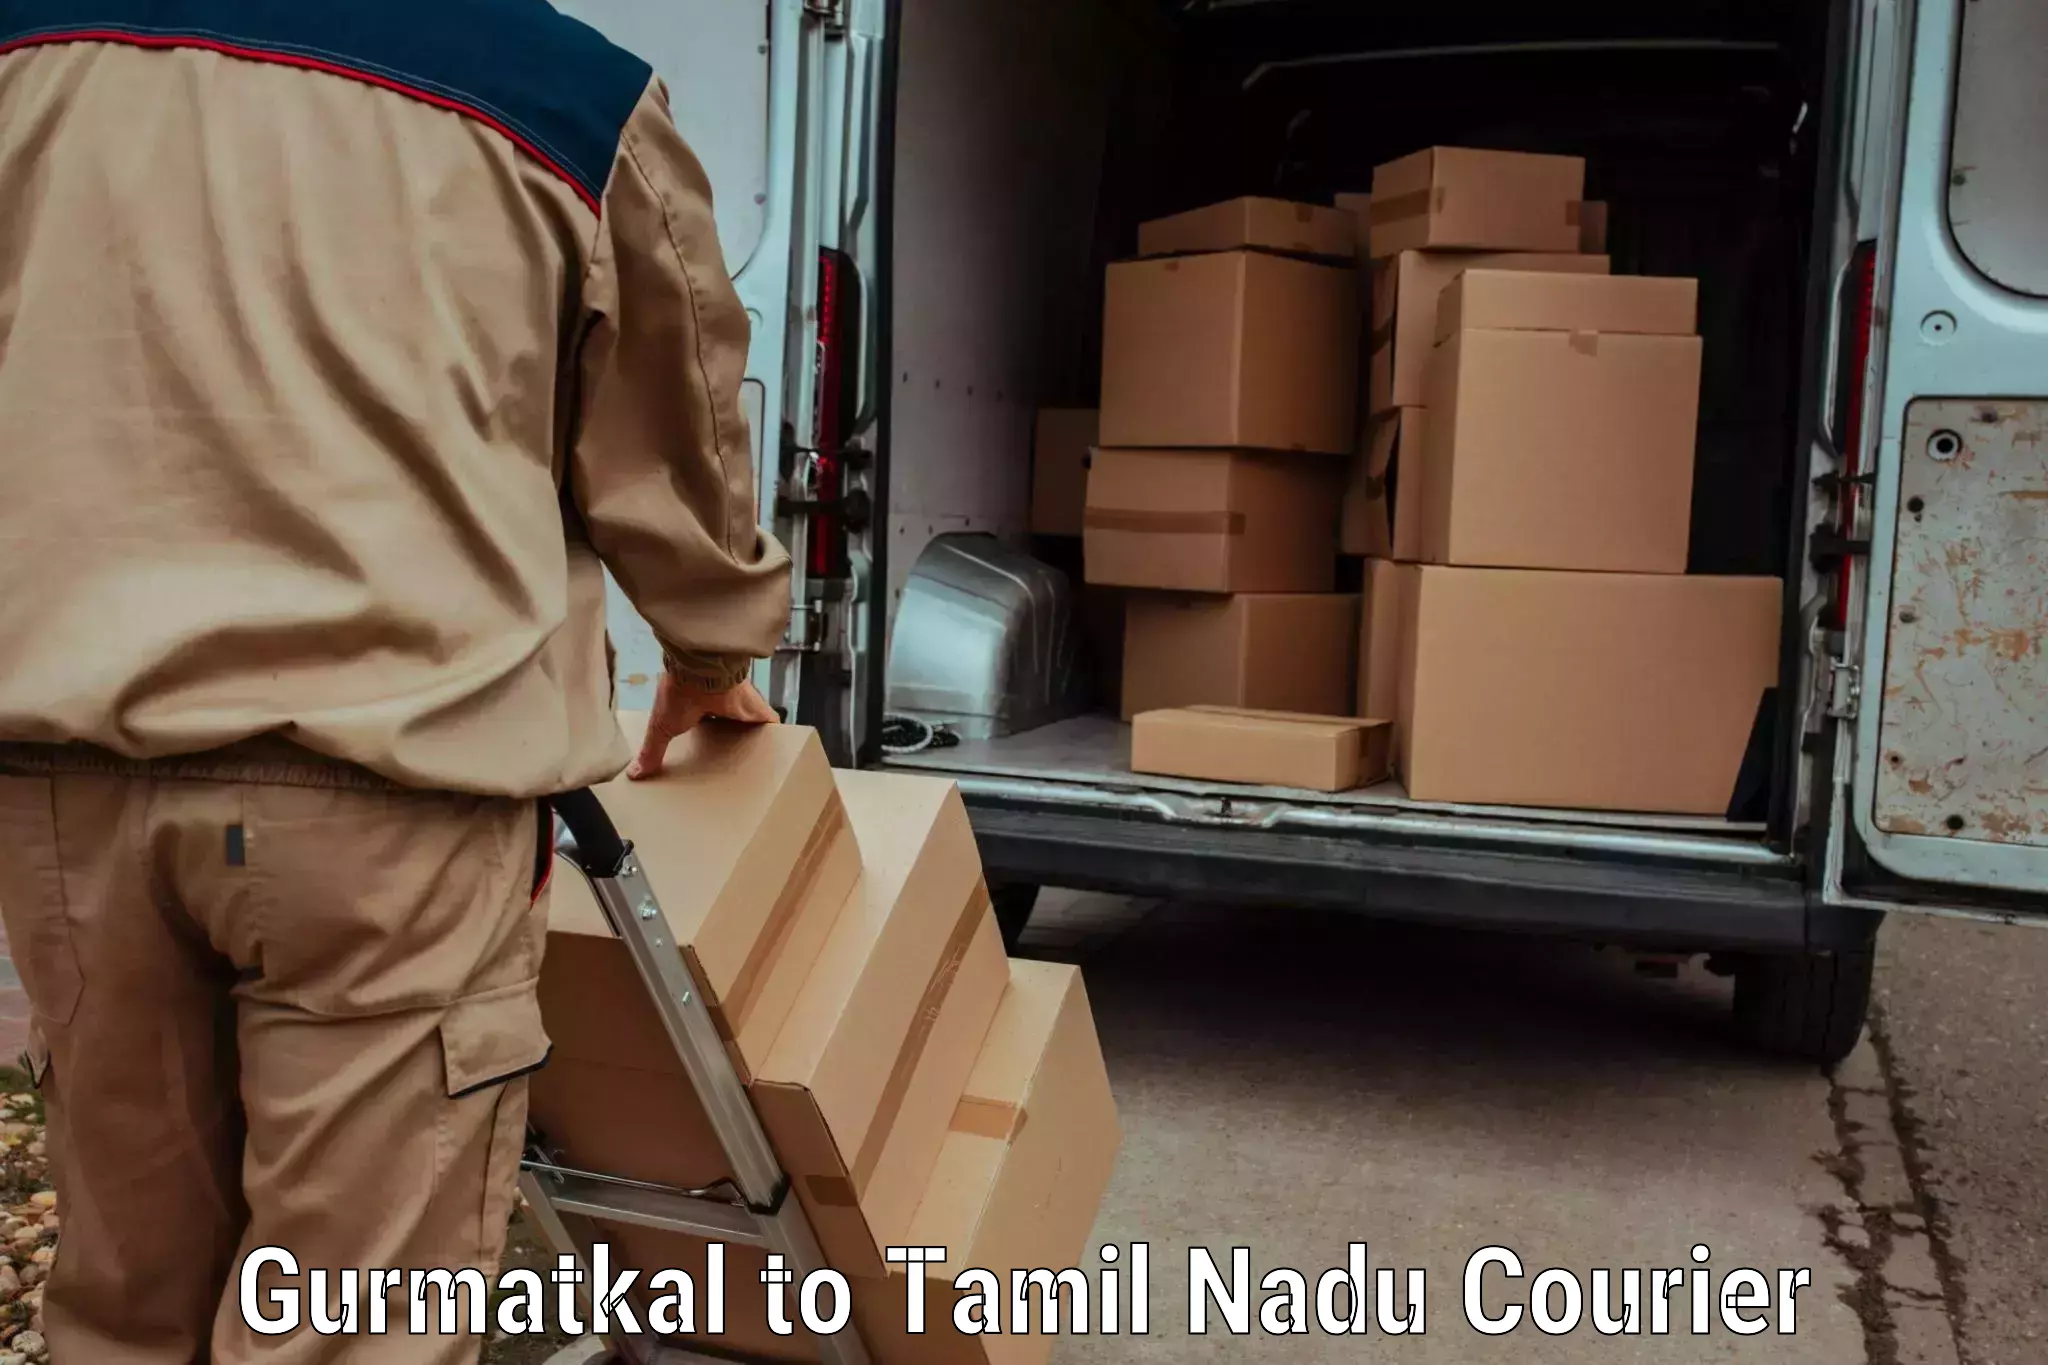 Doorstep delivery service Gurmatkal to Meenakshi Academy of Higher Education and Research Chennai